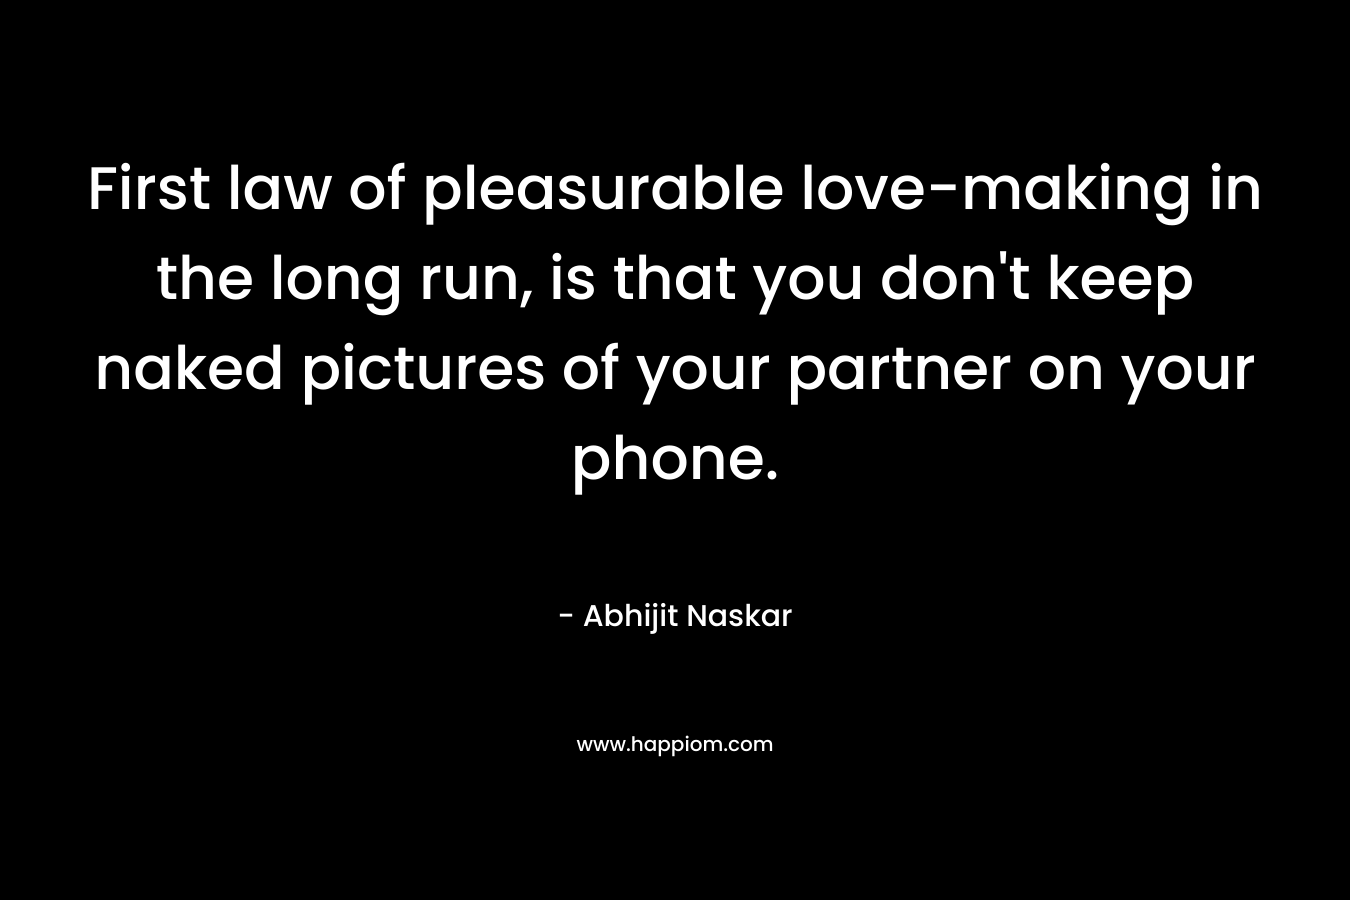 First law of pleasurable love-making in the long run, is that you don't keep naked pictures of your partner on your phone.